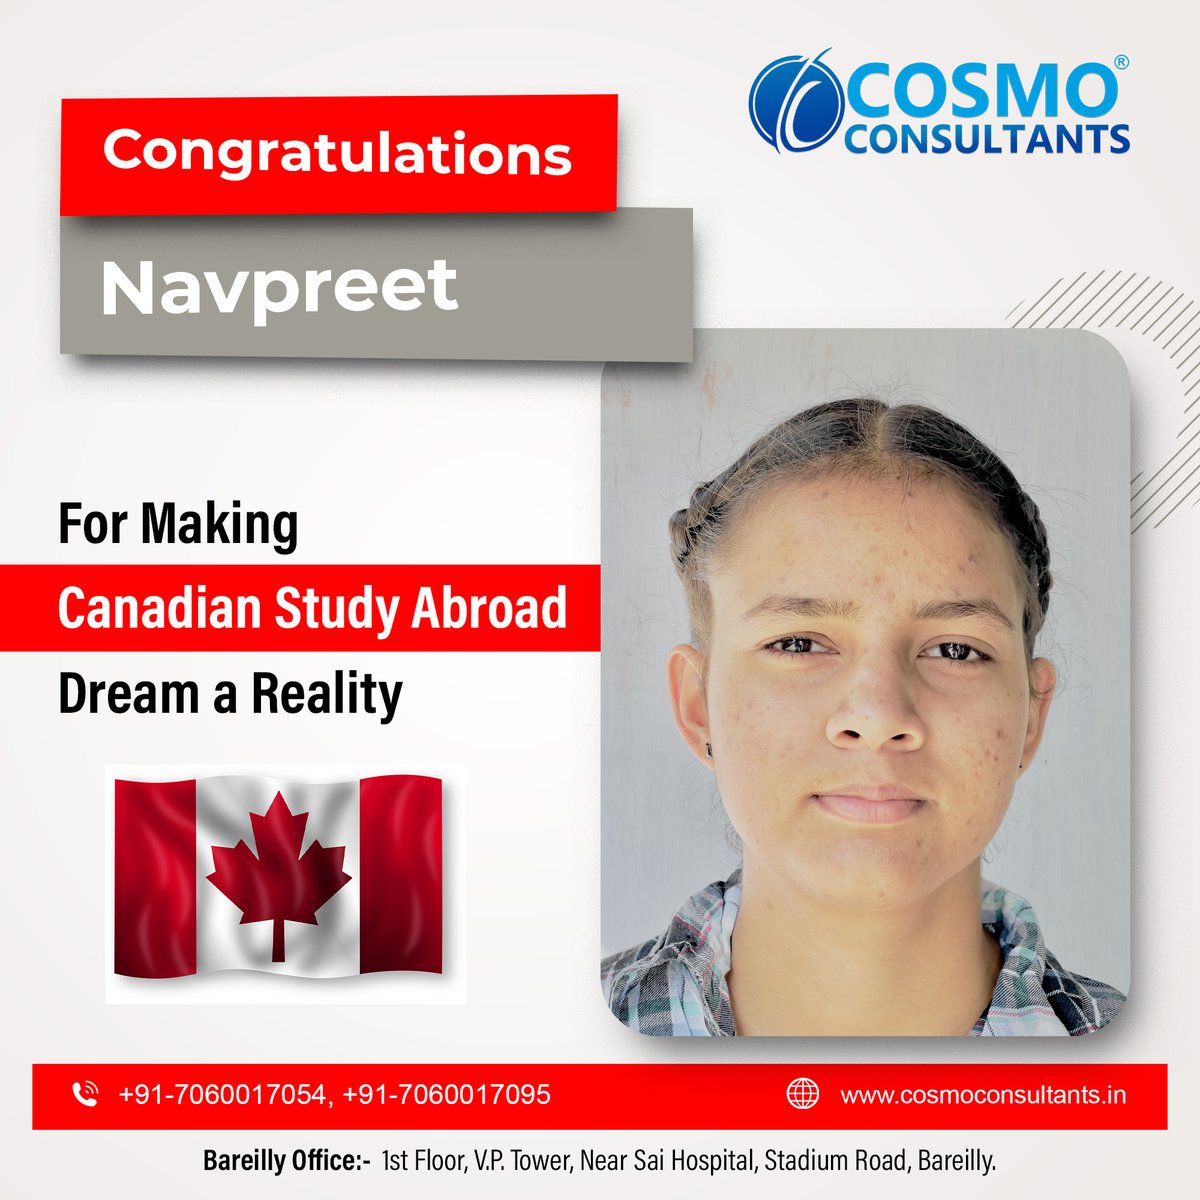 Congratulations 𝐌𝐢𝐬𝐬. 𝐍𝐚𝐯𝐩𝐫𝐞𝐞𝐭 for your study journey in Canada. Cosmo Consultants wishes you a very bright and successful career ahead.
For more information reach us: +91-7060017054, +91-7060017095.

#CosmoConsultants #Canada #StudyInCanada #StudyAbroad #studentvisa